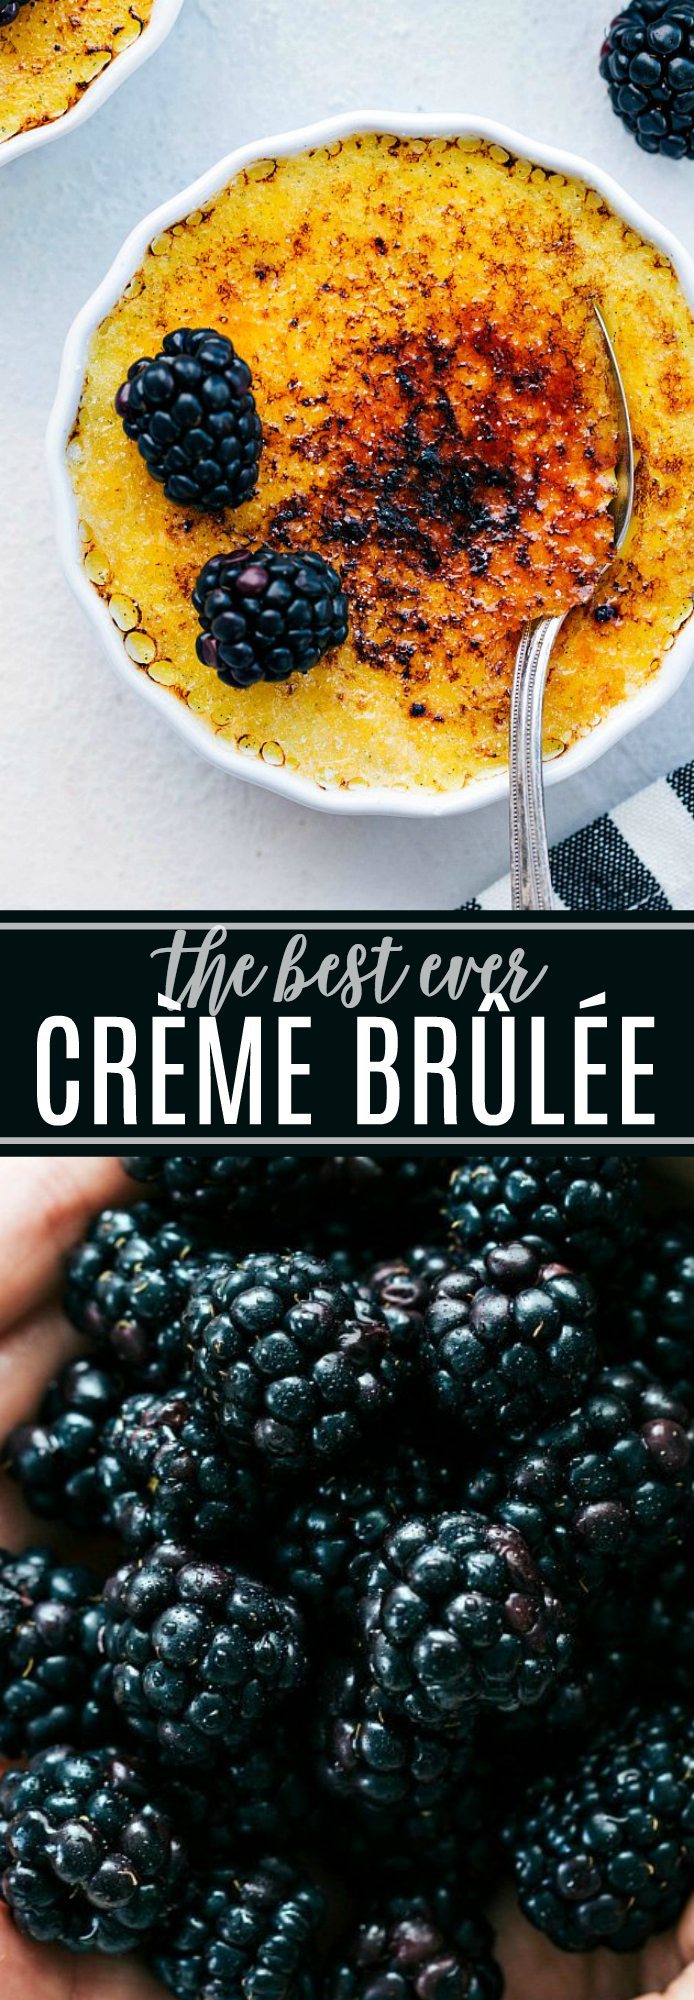 The ultimate BEST EVER easy creme brulee! So easy to make at home and makes for a gorgeous fancy dessert! Plus NO special kitchen torch required (oven instructions). Video tutorial included. via chelseasmessyapron.com #cremebrulee #creme #brulee #dessert #easy #video #tutorial #custard #dessert #helpful #tips #valentines #day #treat #desserts